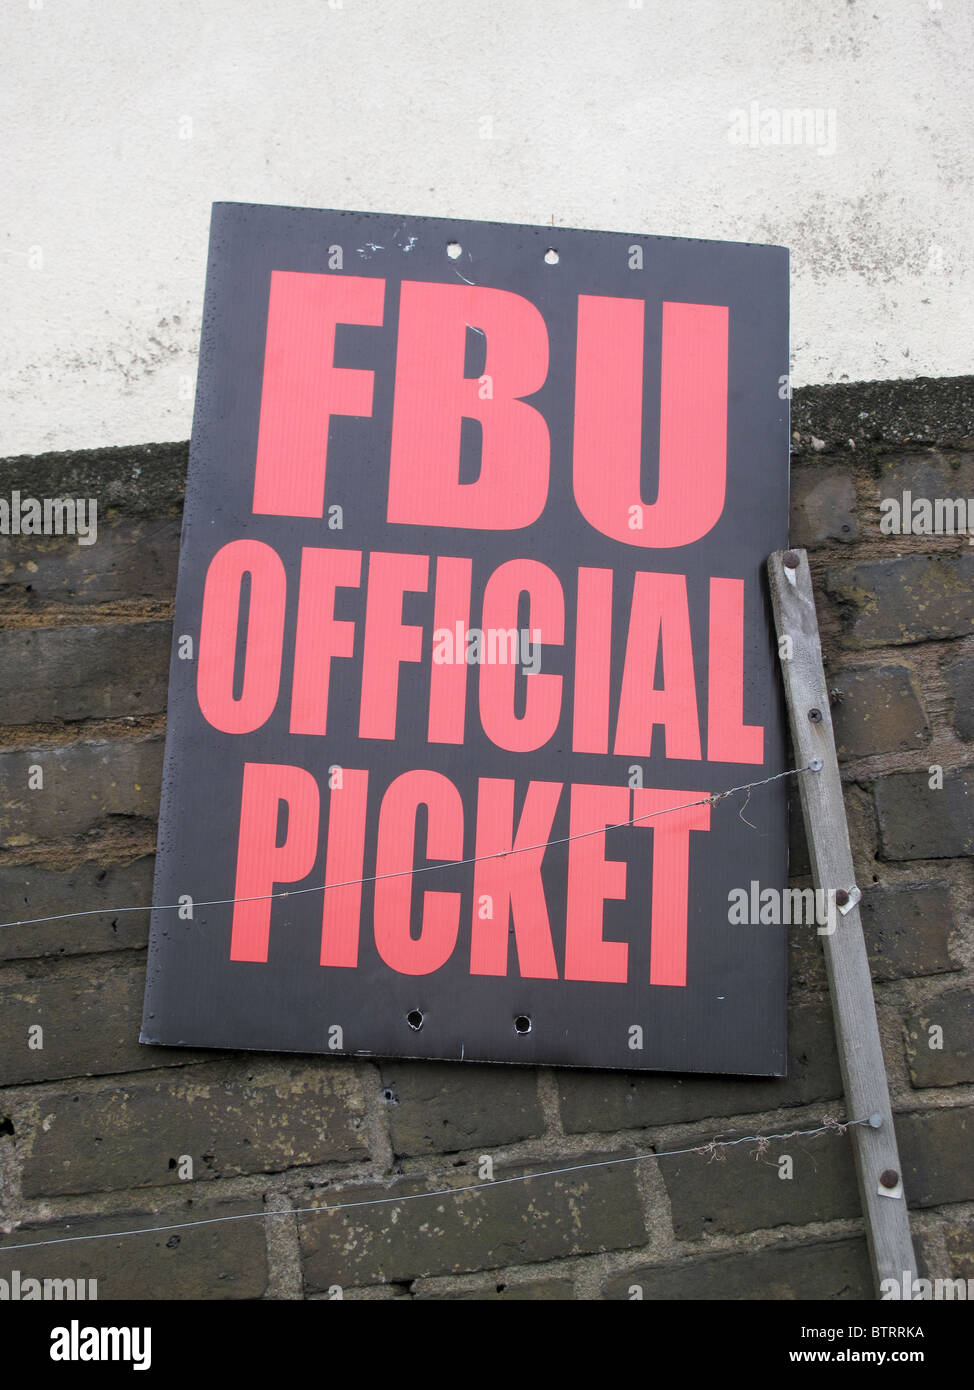 London Fire Brigade strike banner FBU official picket Stock Photo